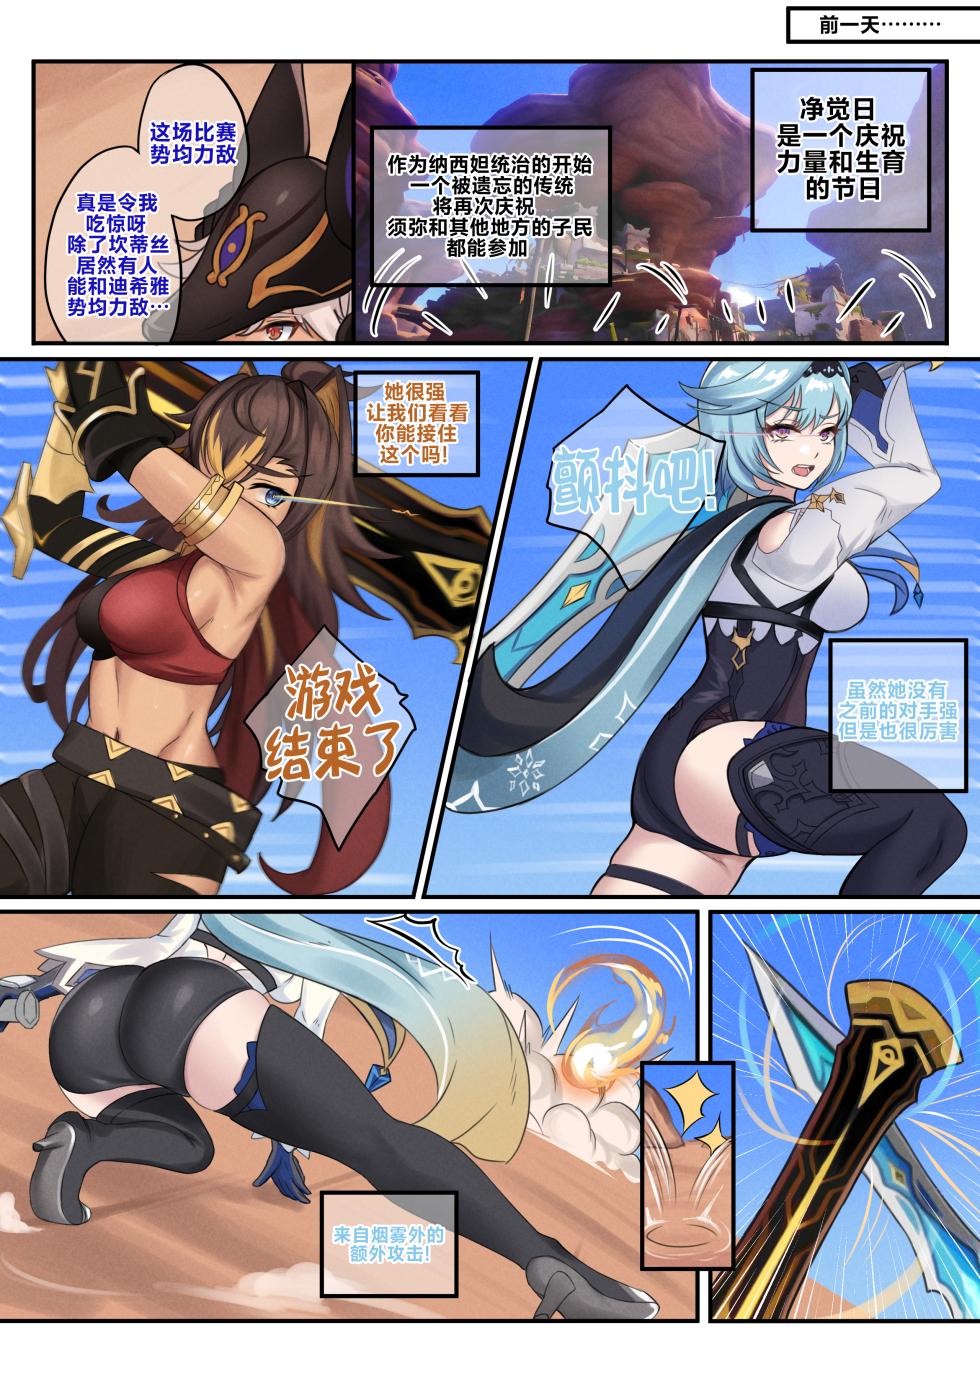 [BruLee] Hot and Cold Sunyata (Genshin Impact) [Chinese] [黎欧出资汉化] - Page 4